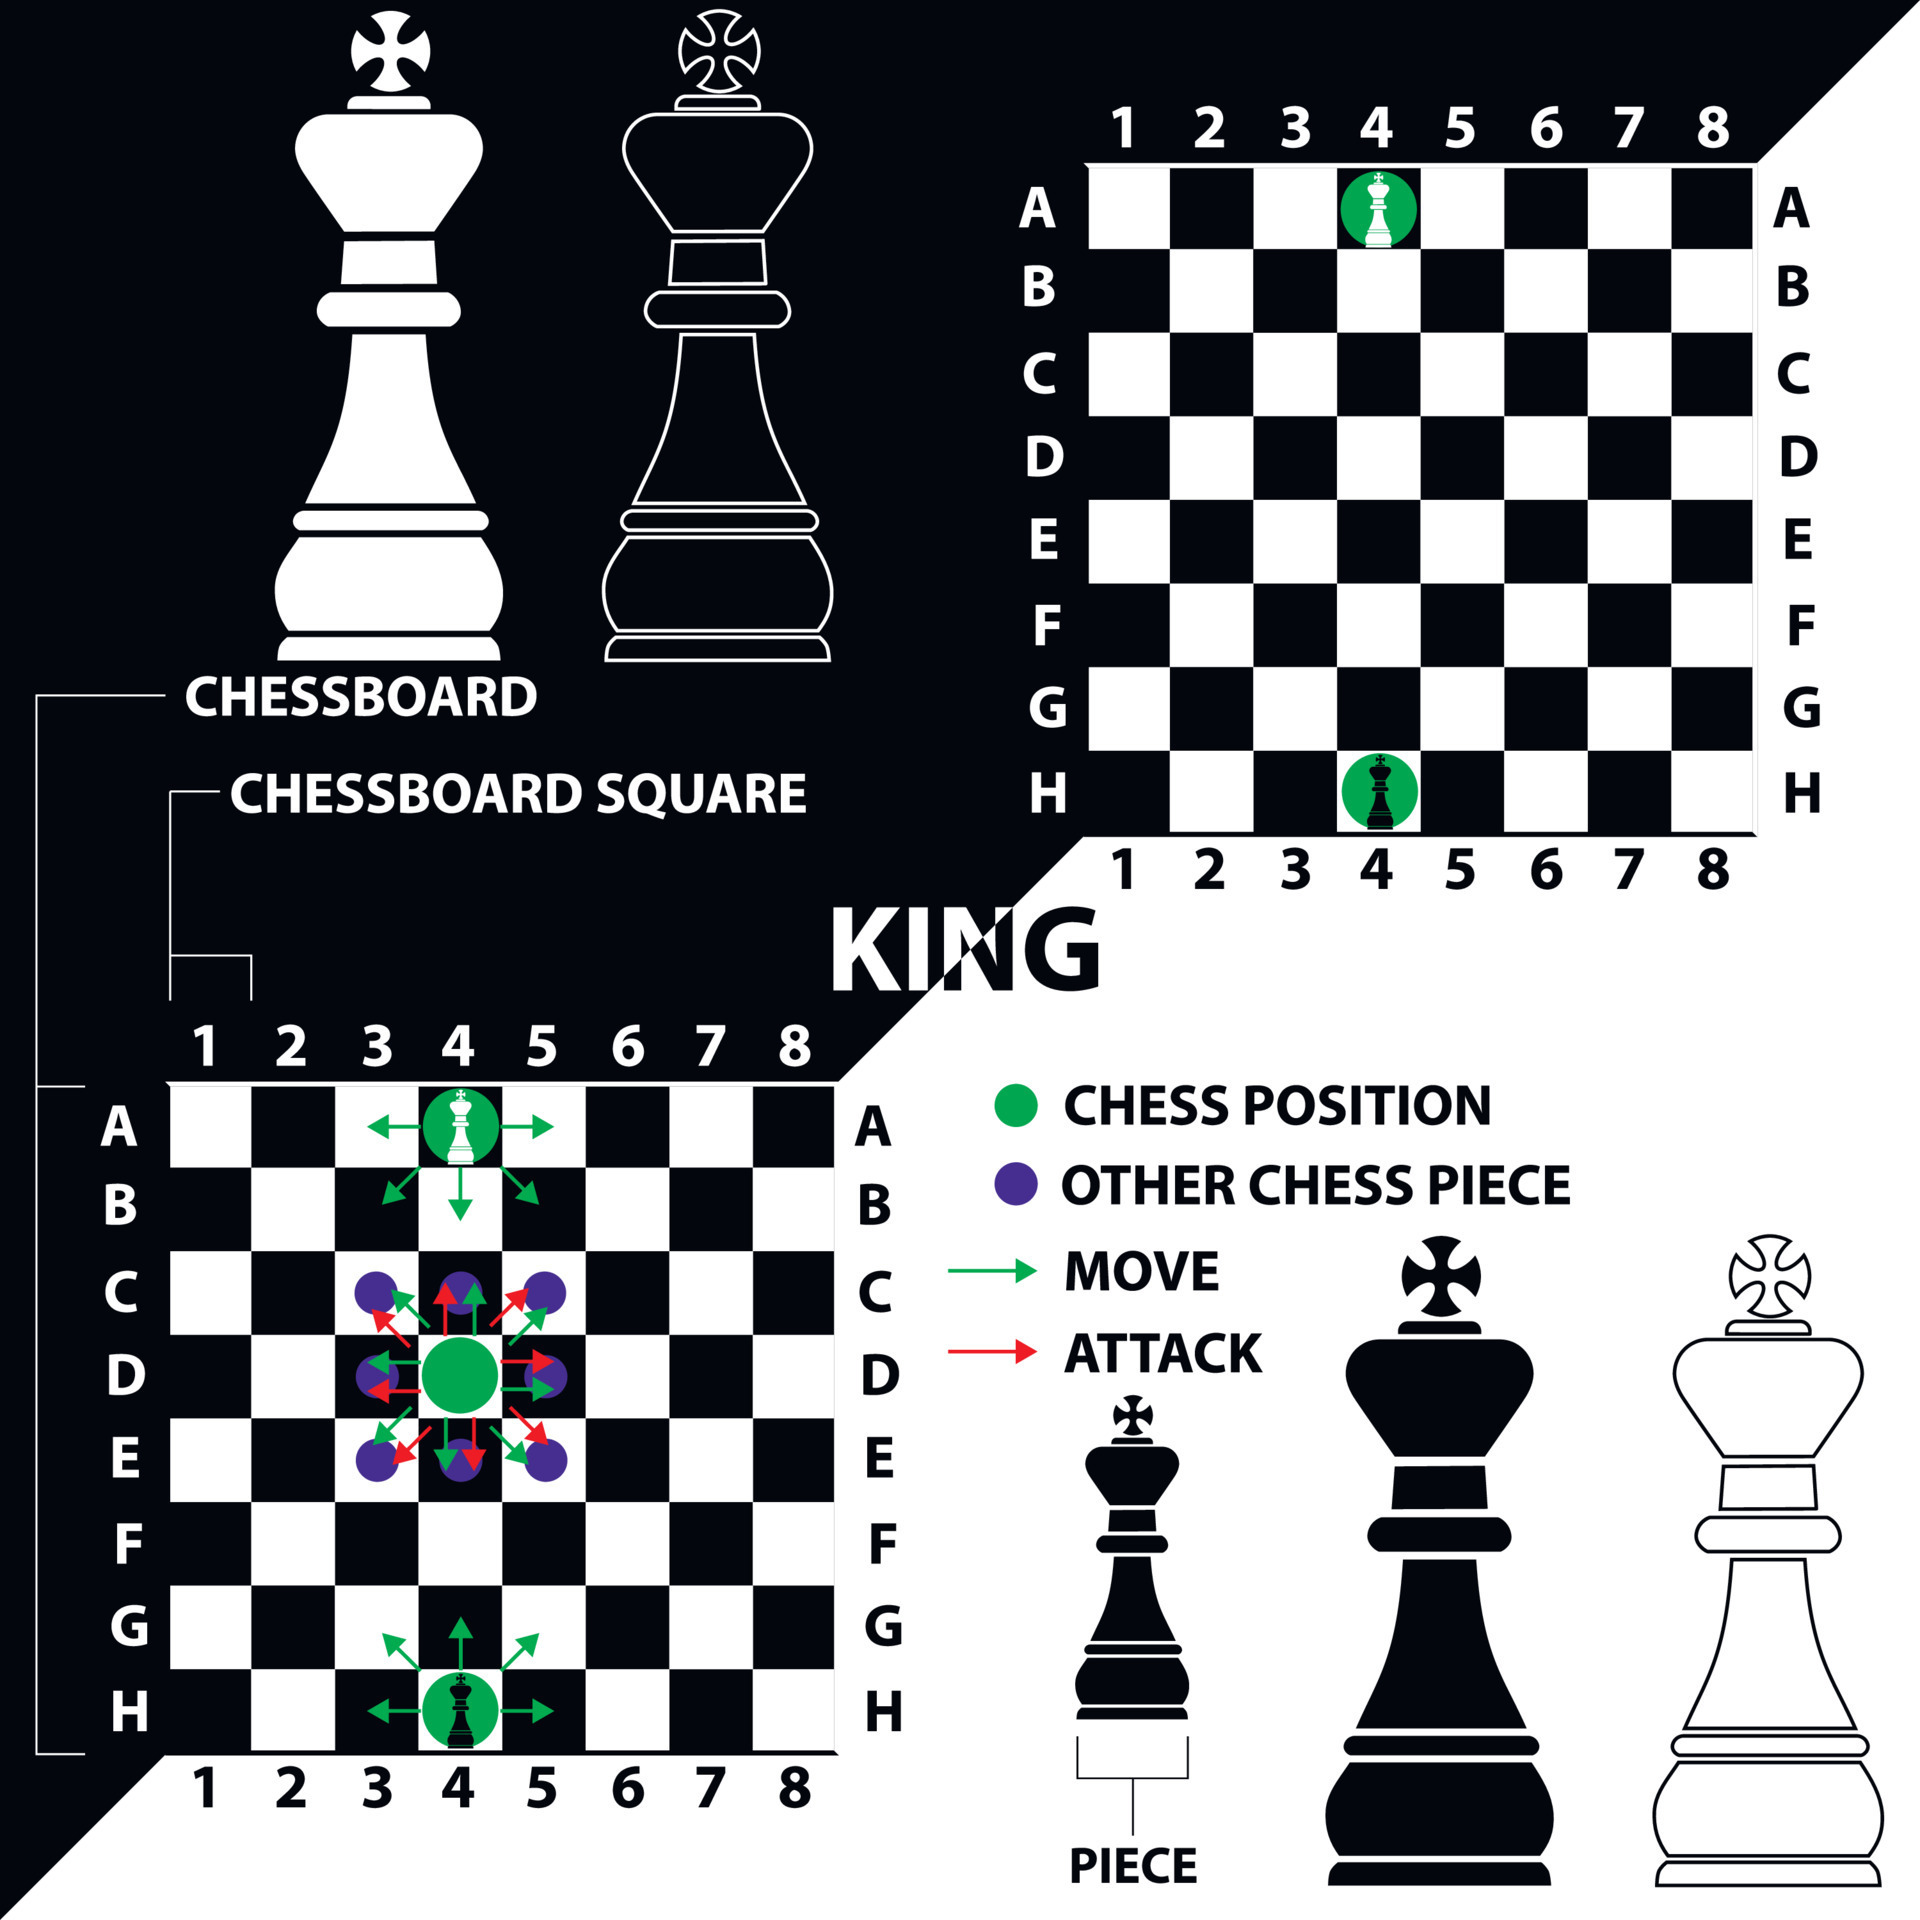 King. Chess piece made in the form of illustrations and icons. Black and  white king with a description of the position on the chessboard and moves.  Educational material for beginner chess players.